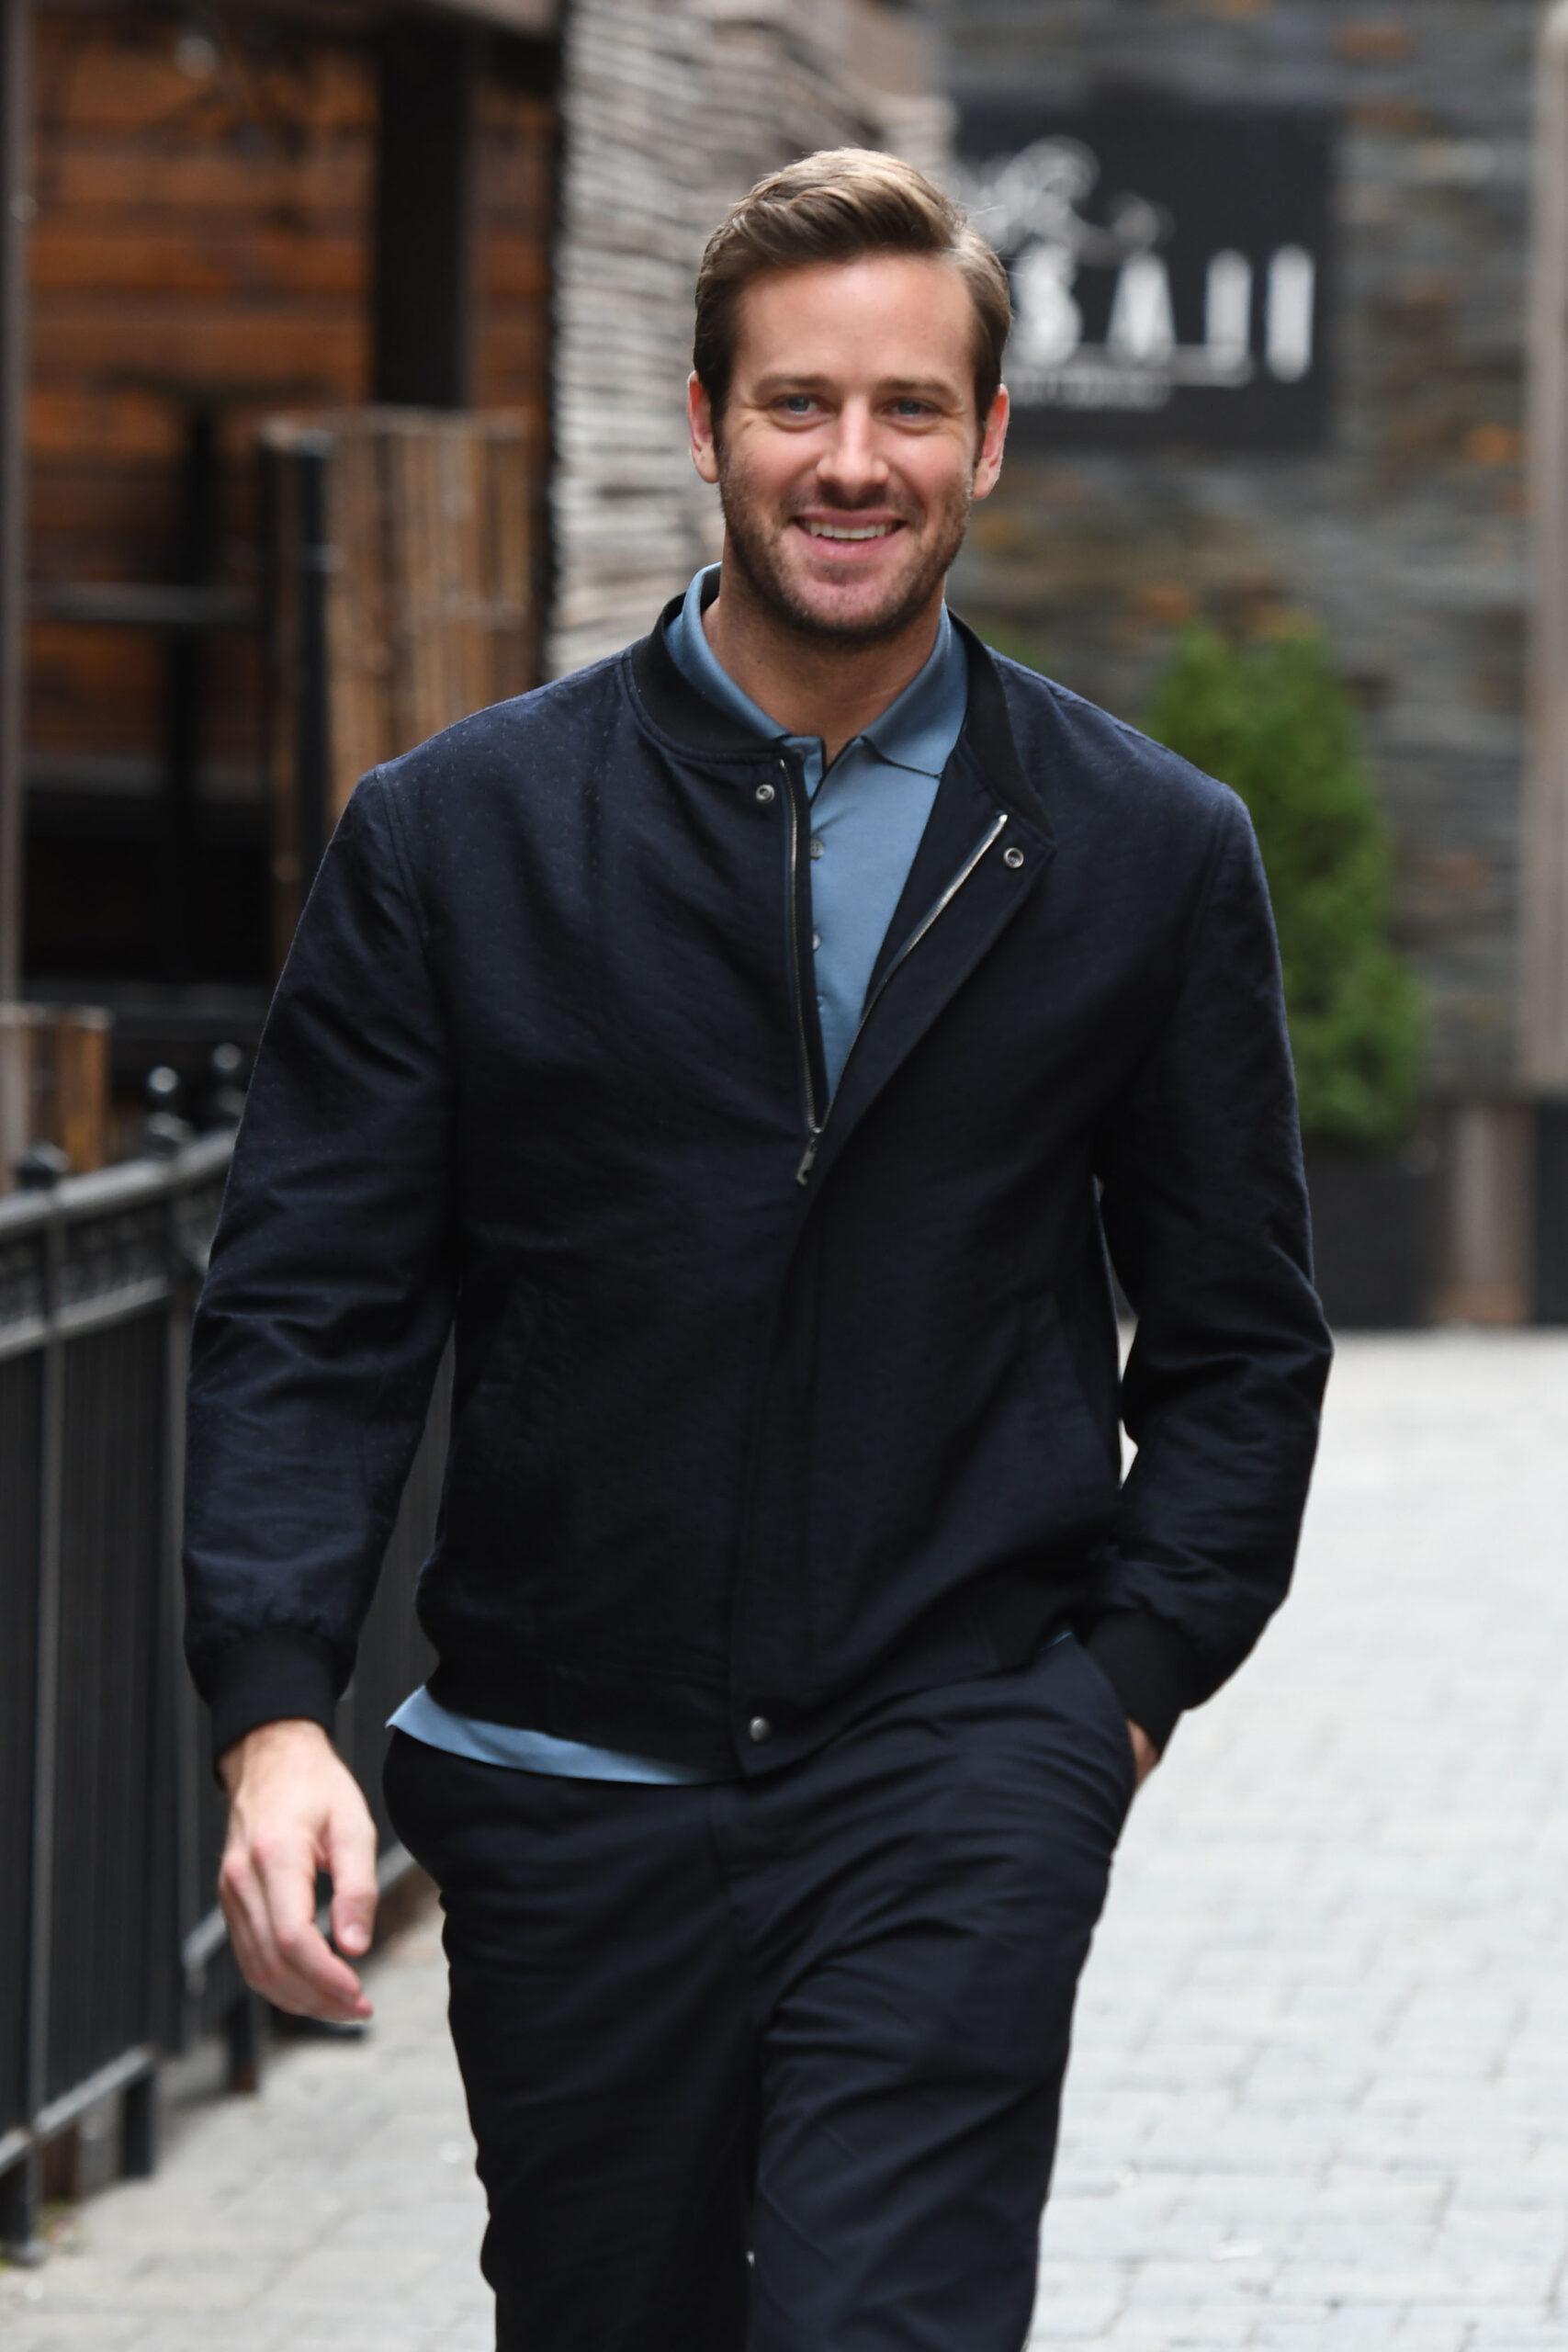 Armie Hammer spotted strolling in Toronto as he promotes 'Hotel Mumbai' at TIFF